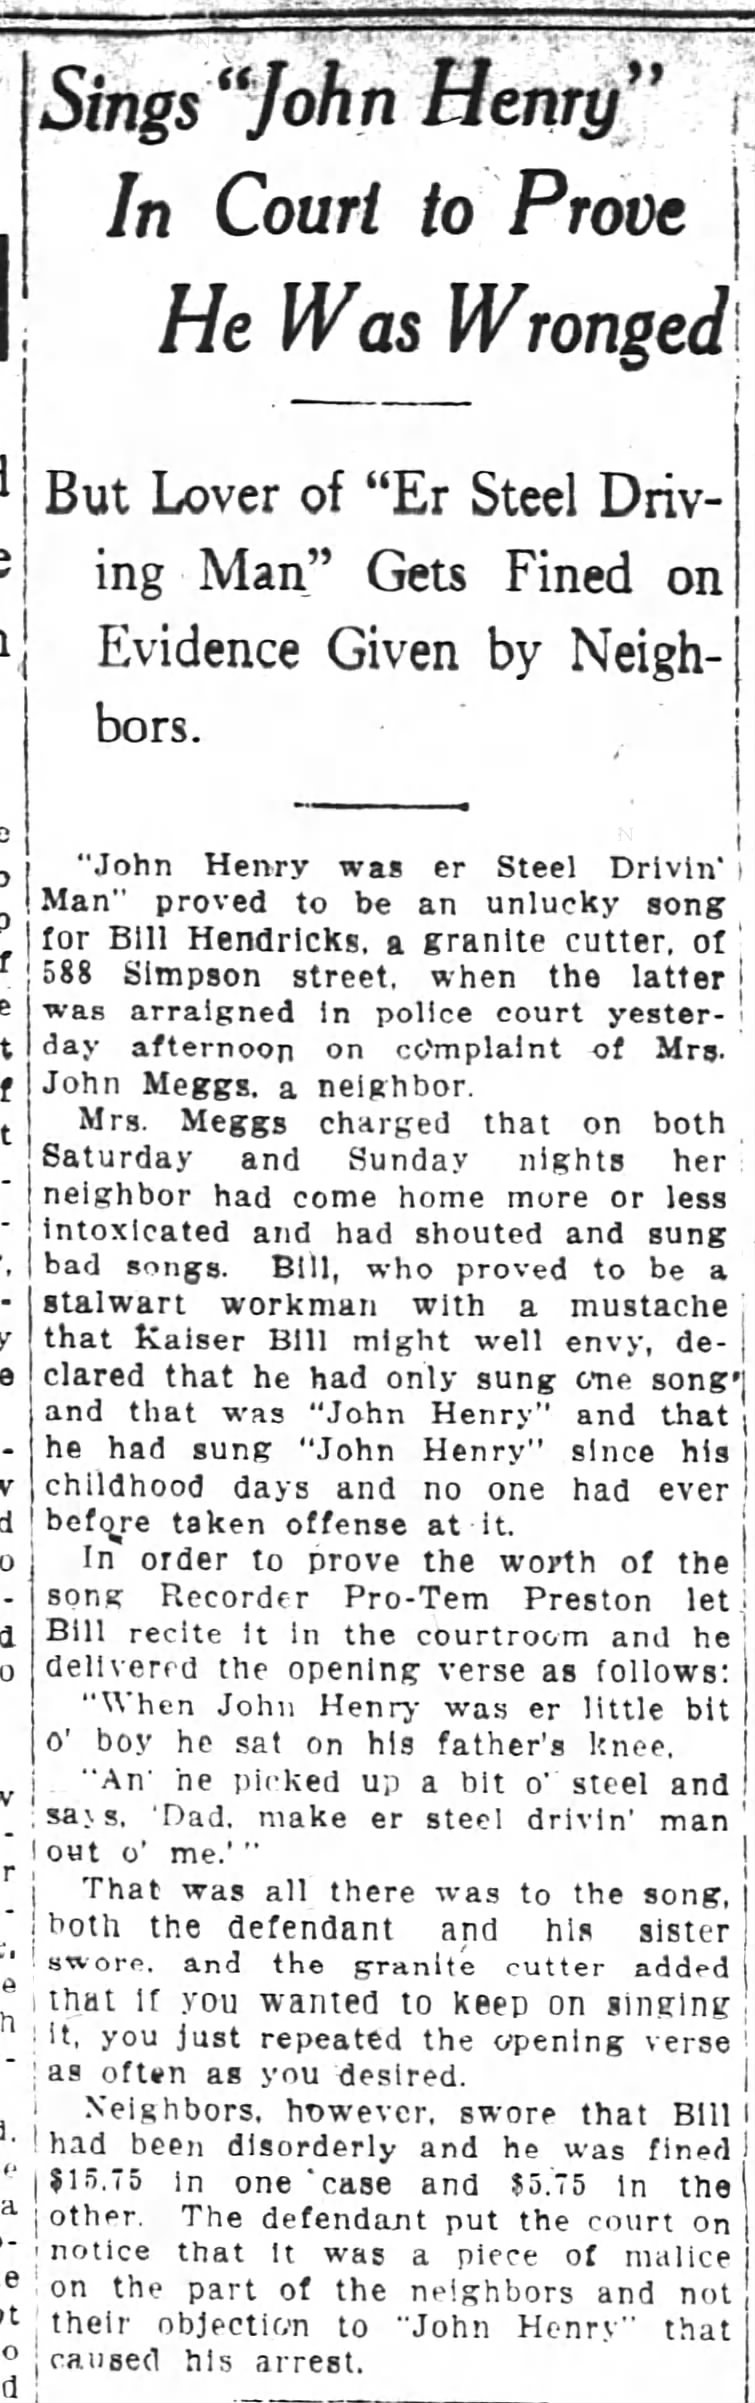 Sings "John Henry" In Court to Prove He Was Wronged, Atlanta Constitution (Sept. 2, 1913)